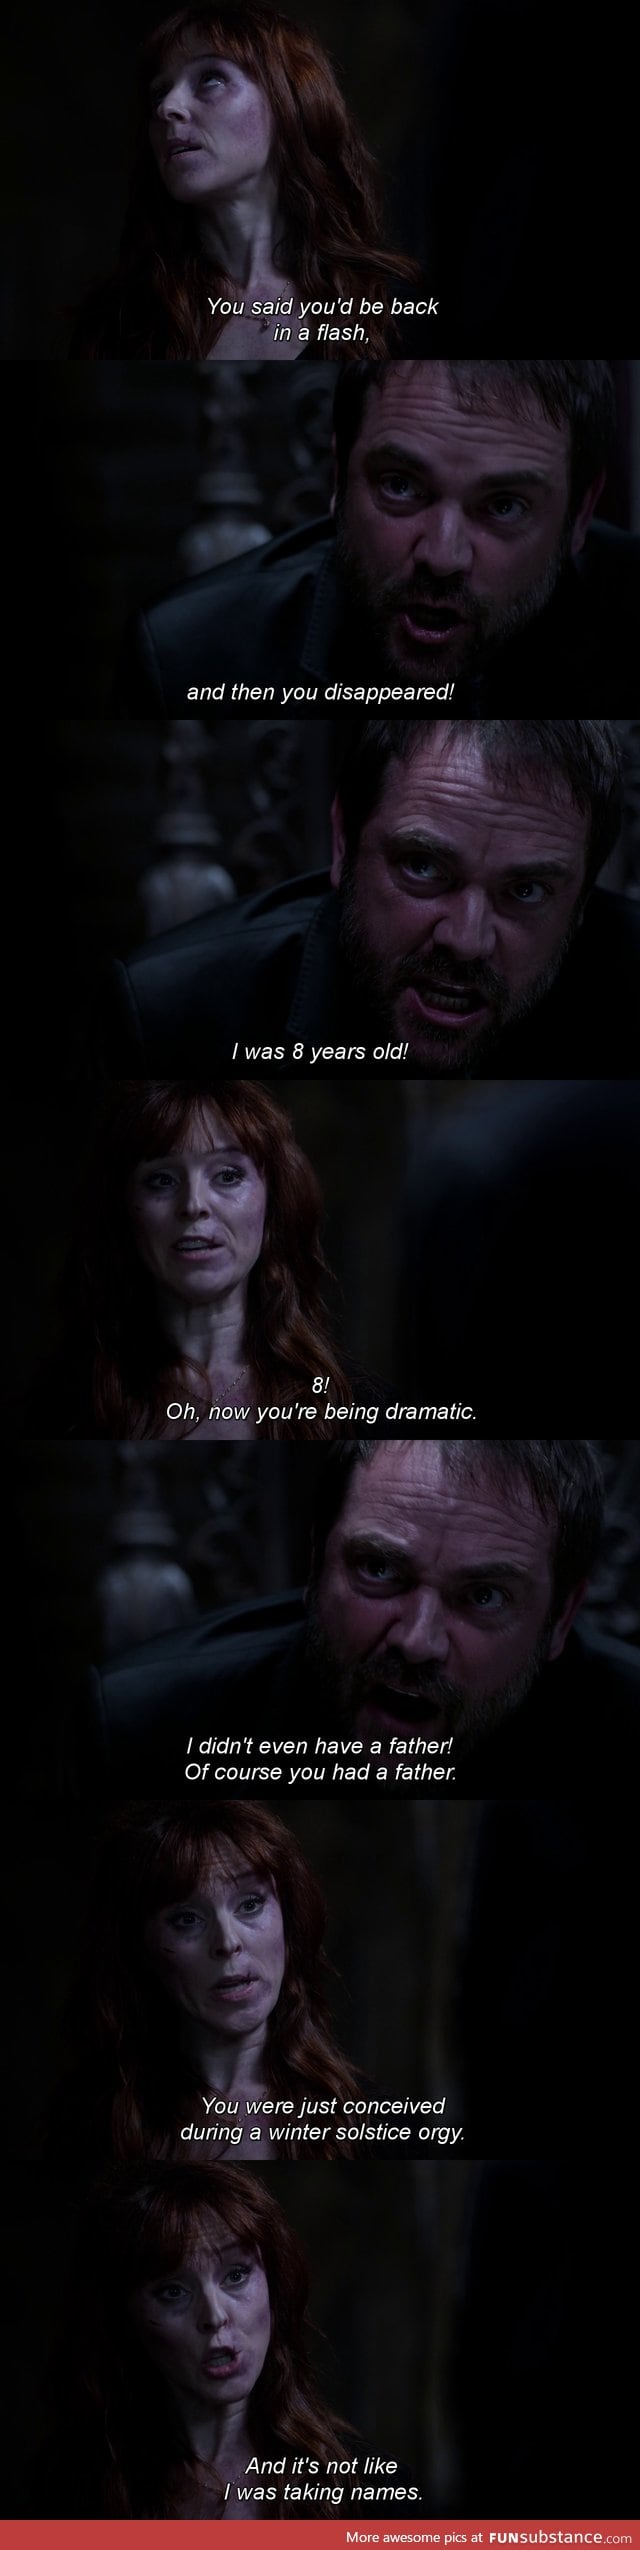 Crowley's Backstory Part 2: His Father